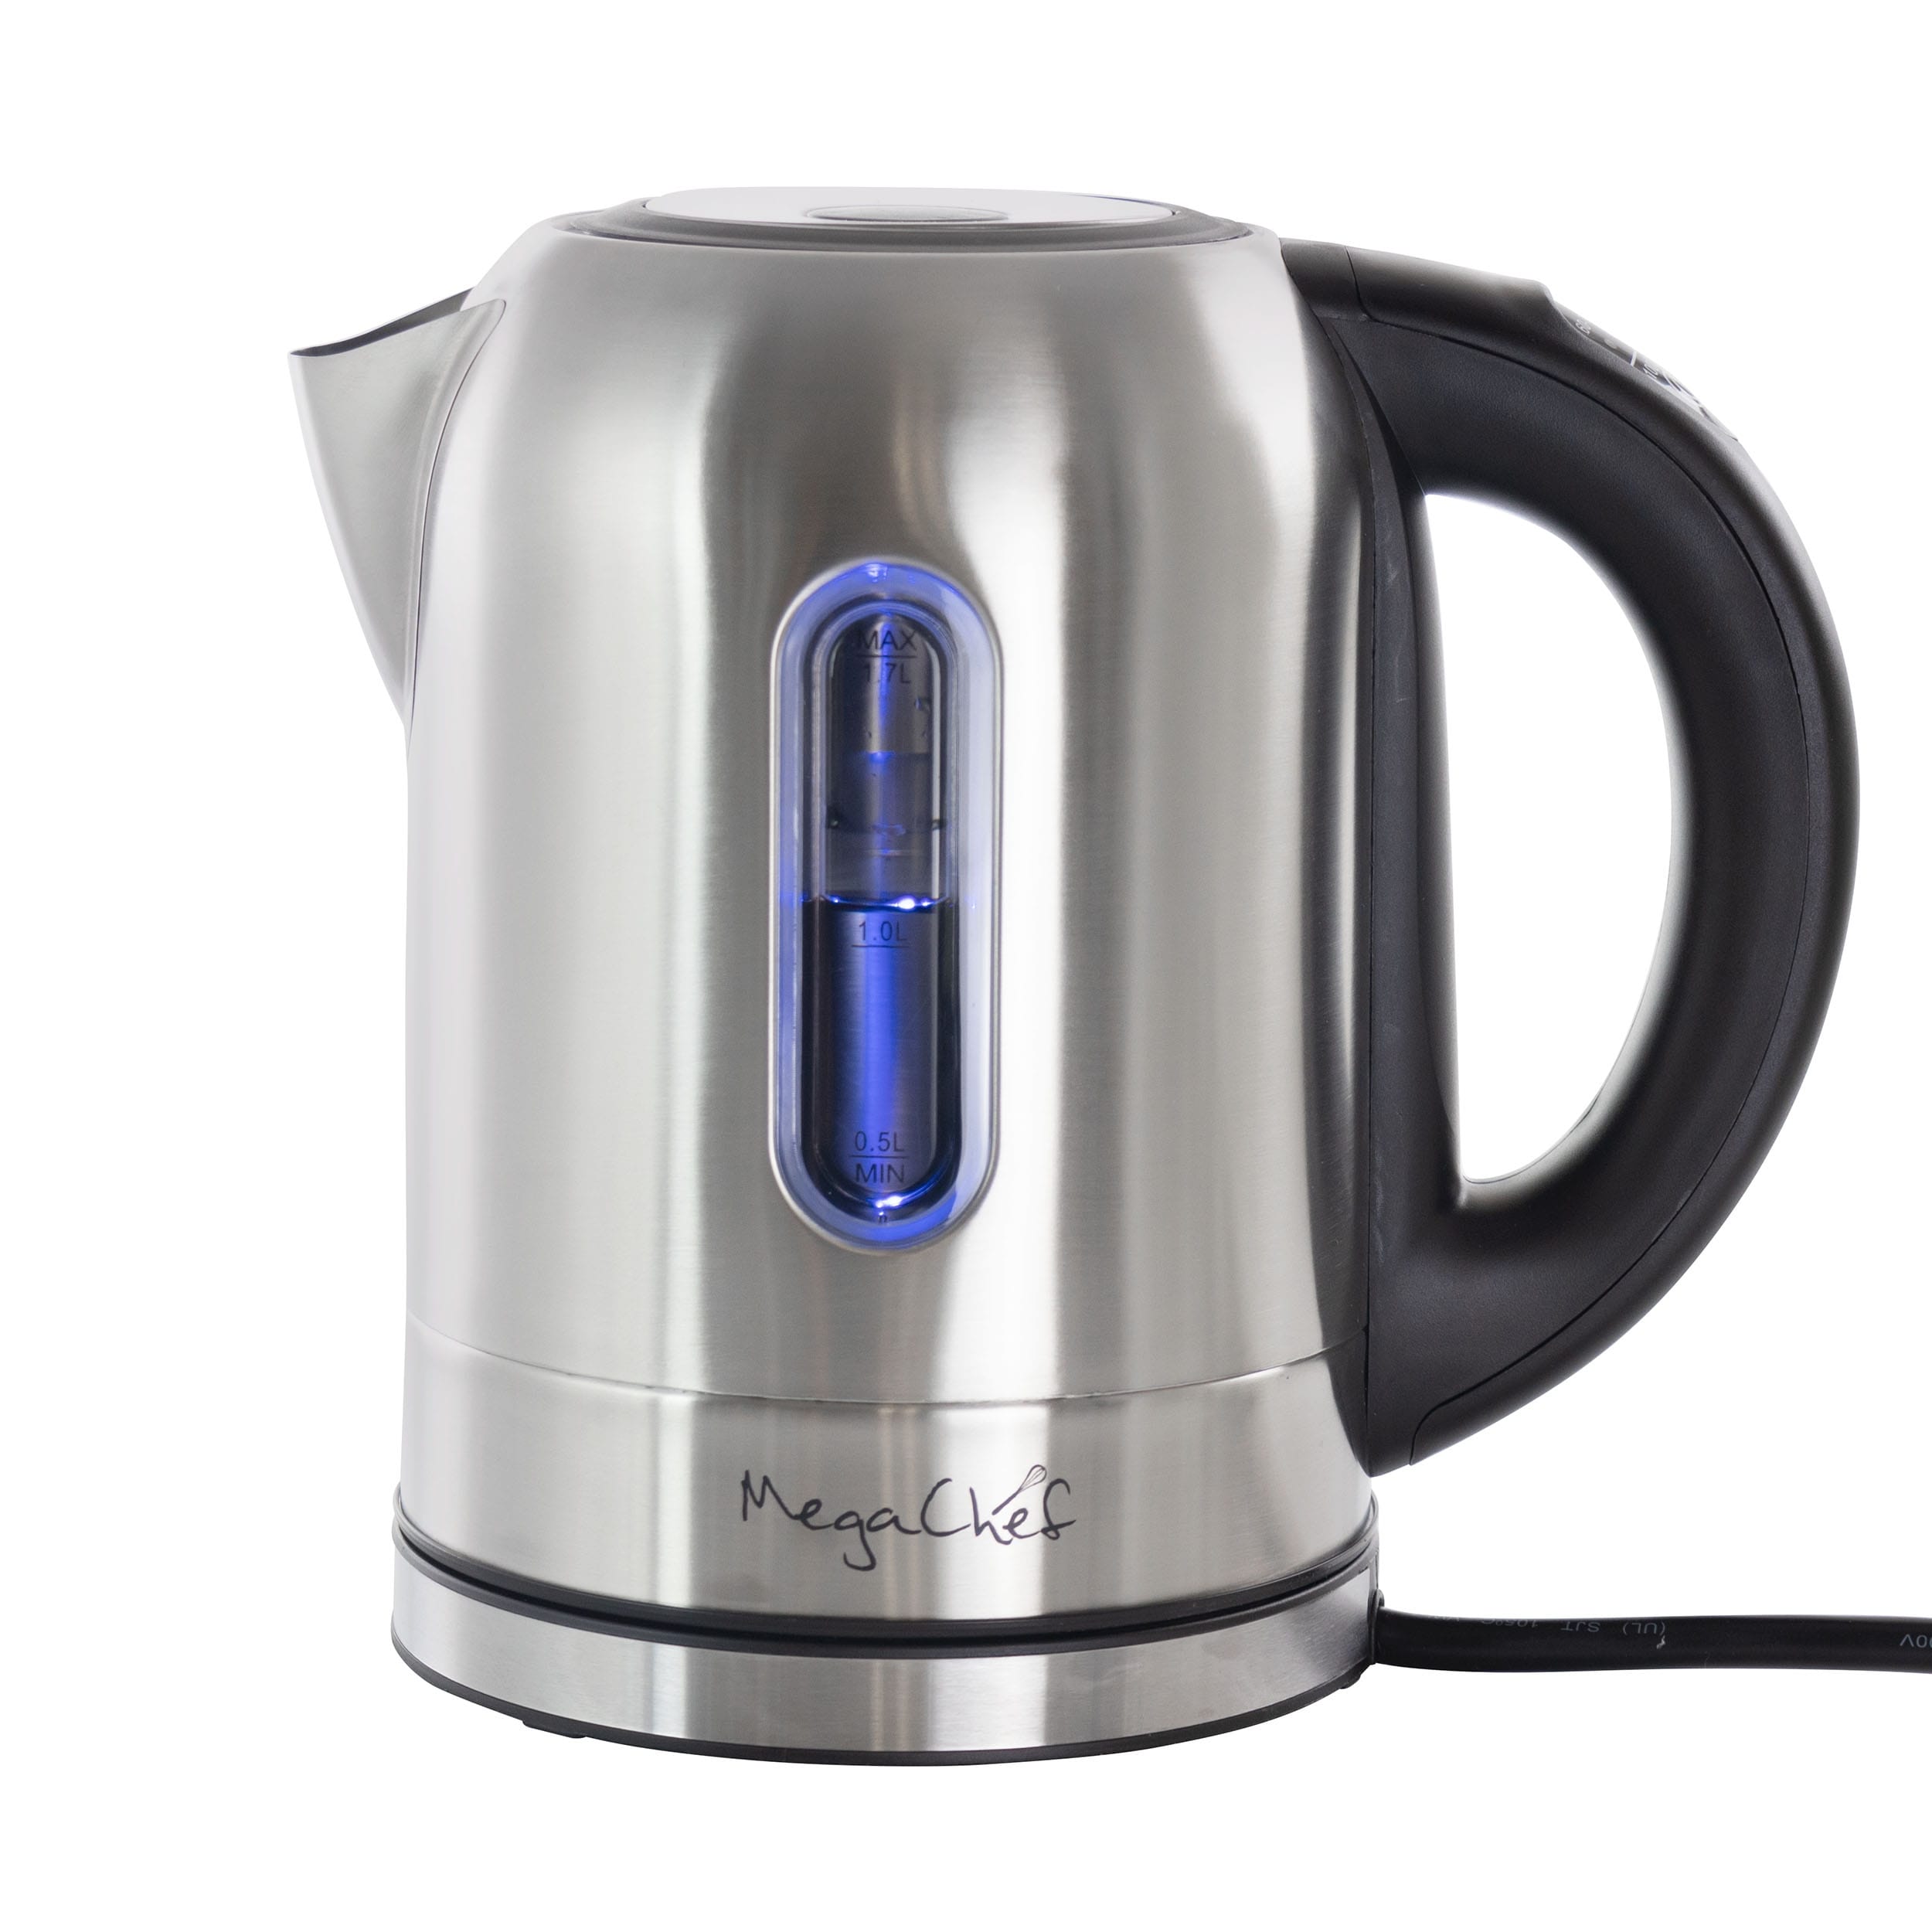 https://ak1.ostkcdn.com/images/products/is/images/direct/373ed0978effc04688fbd3da9ca130b321aa005c/MegaChef-1.7Lt.-Stainless-Steel-Kettle-with-Electric-Base.jpg